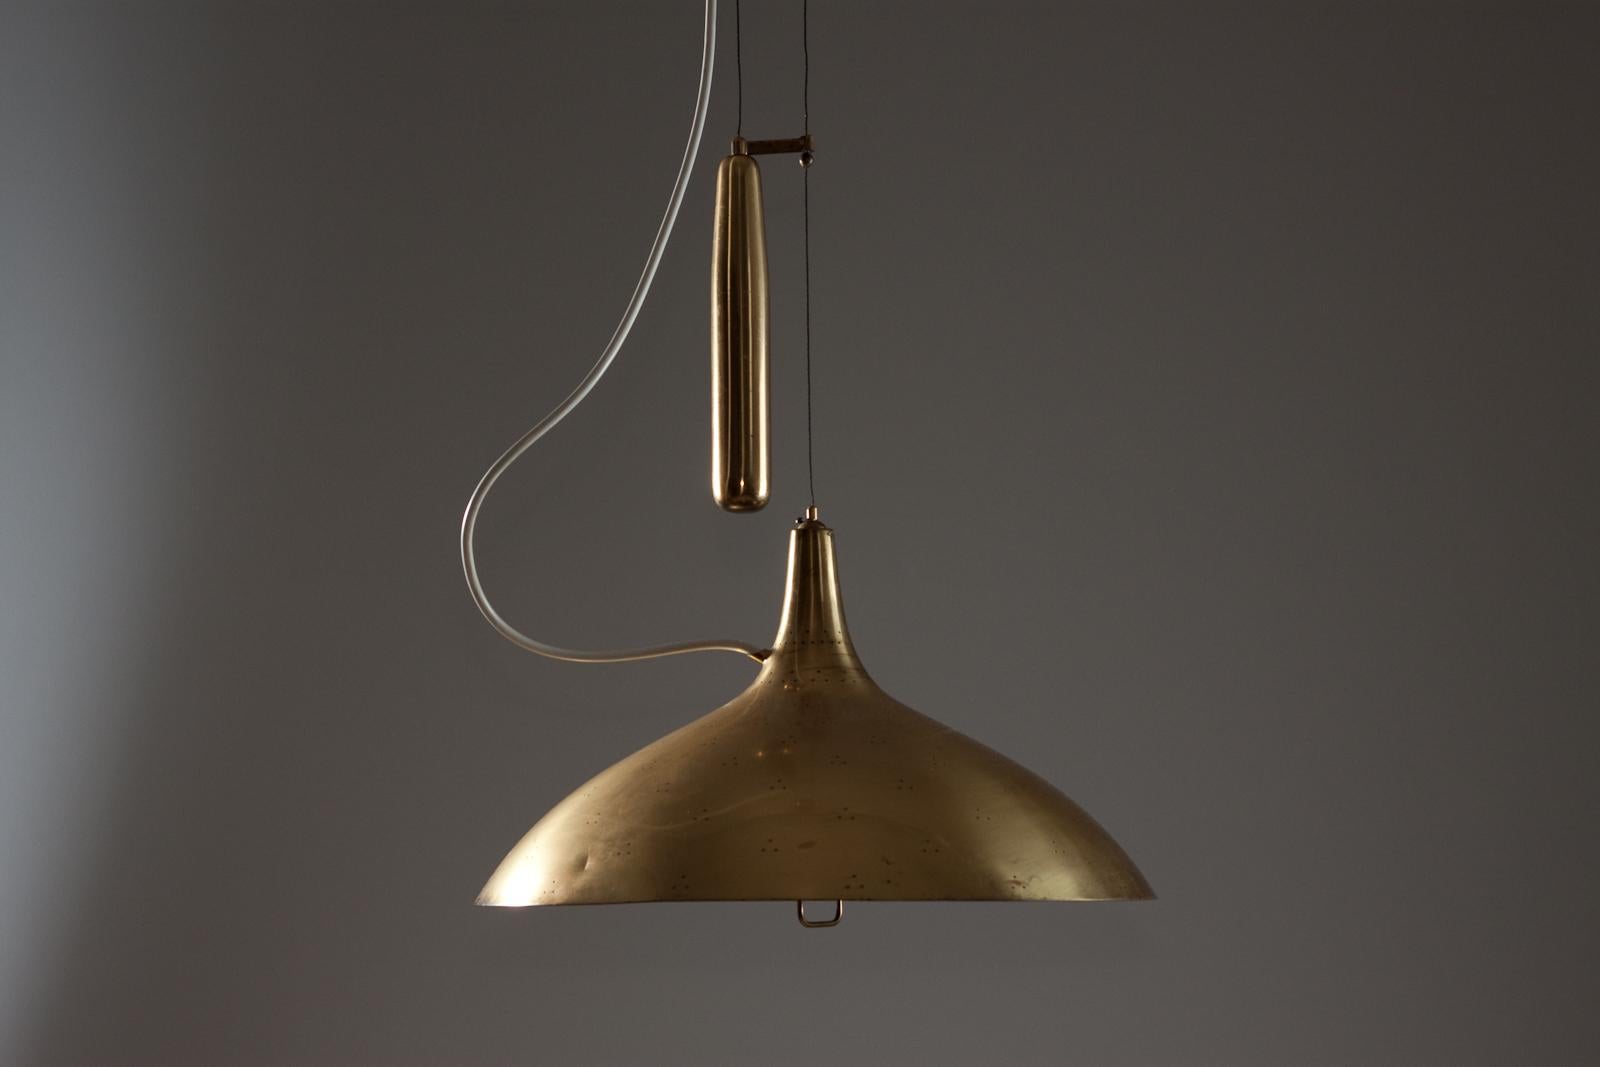 The Paavo Tynell brass counterweight light A1965 for TAITO Oy is a stunning addition to any interior design. With its iconic design and high-quality brass finish, this light fixture adds a touch of elegance and sophistication to any space. The